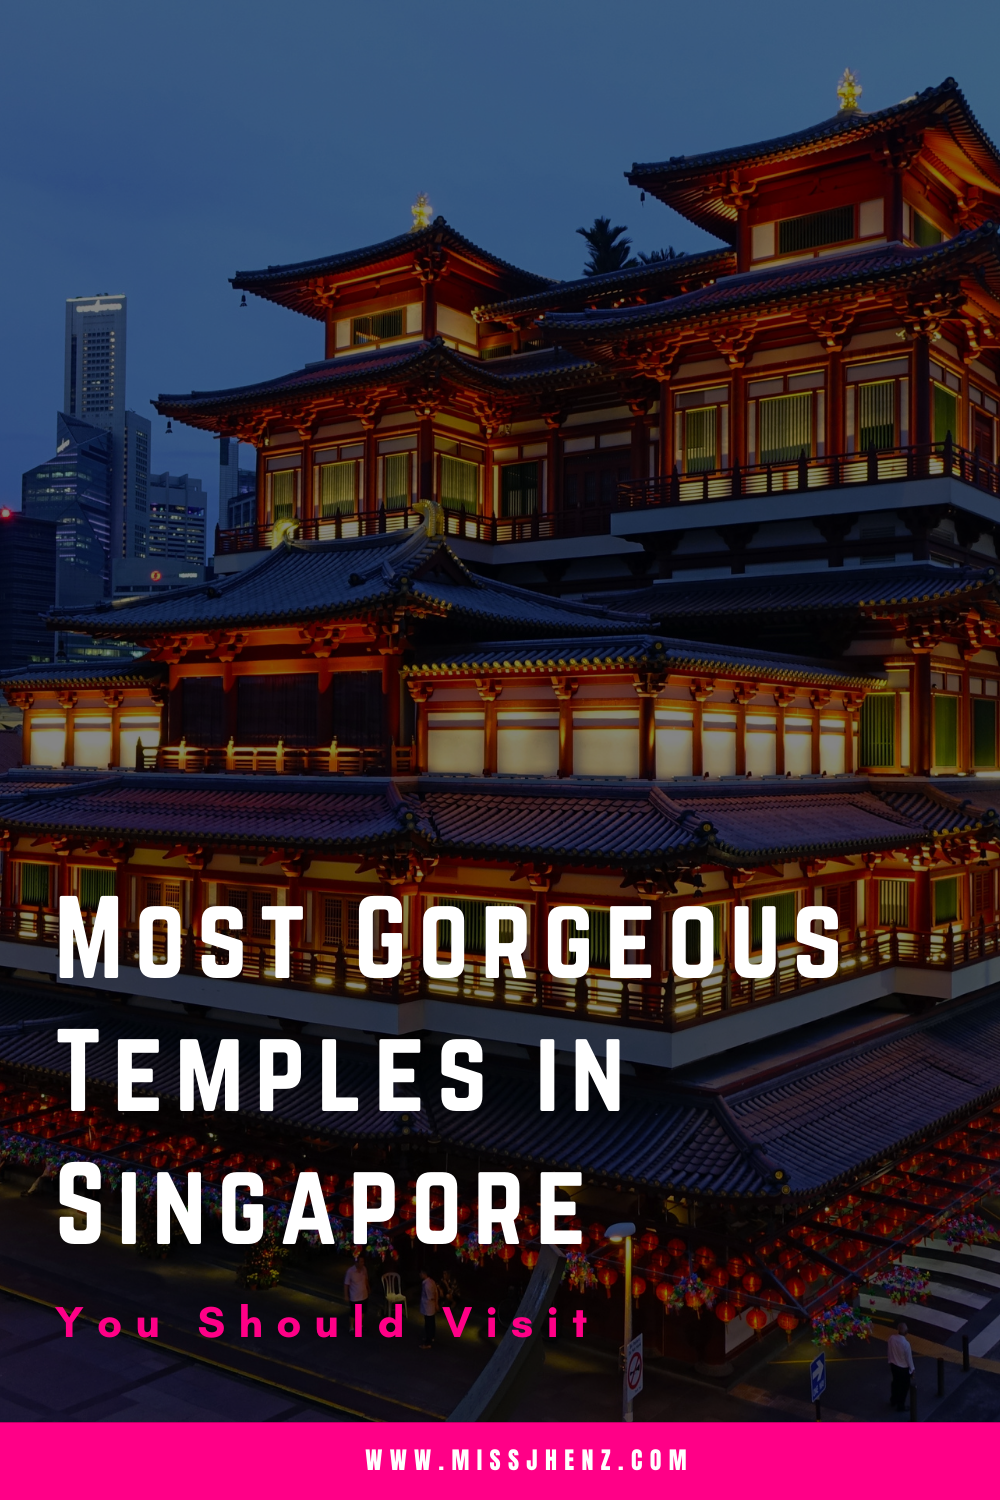 Most Gorgeous Temples in Singapore You Should Visit